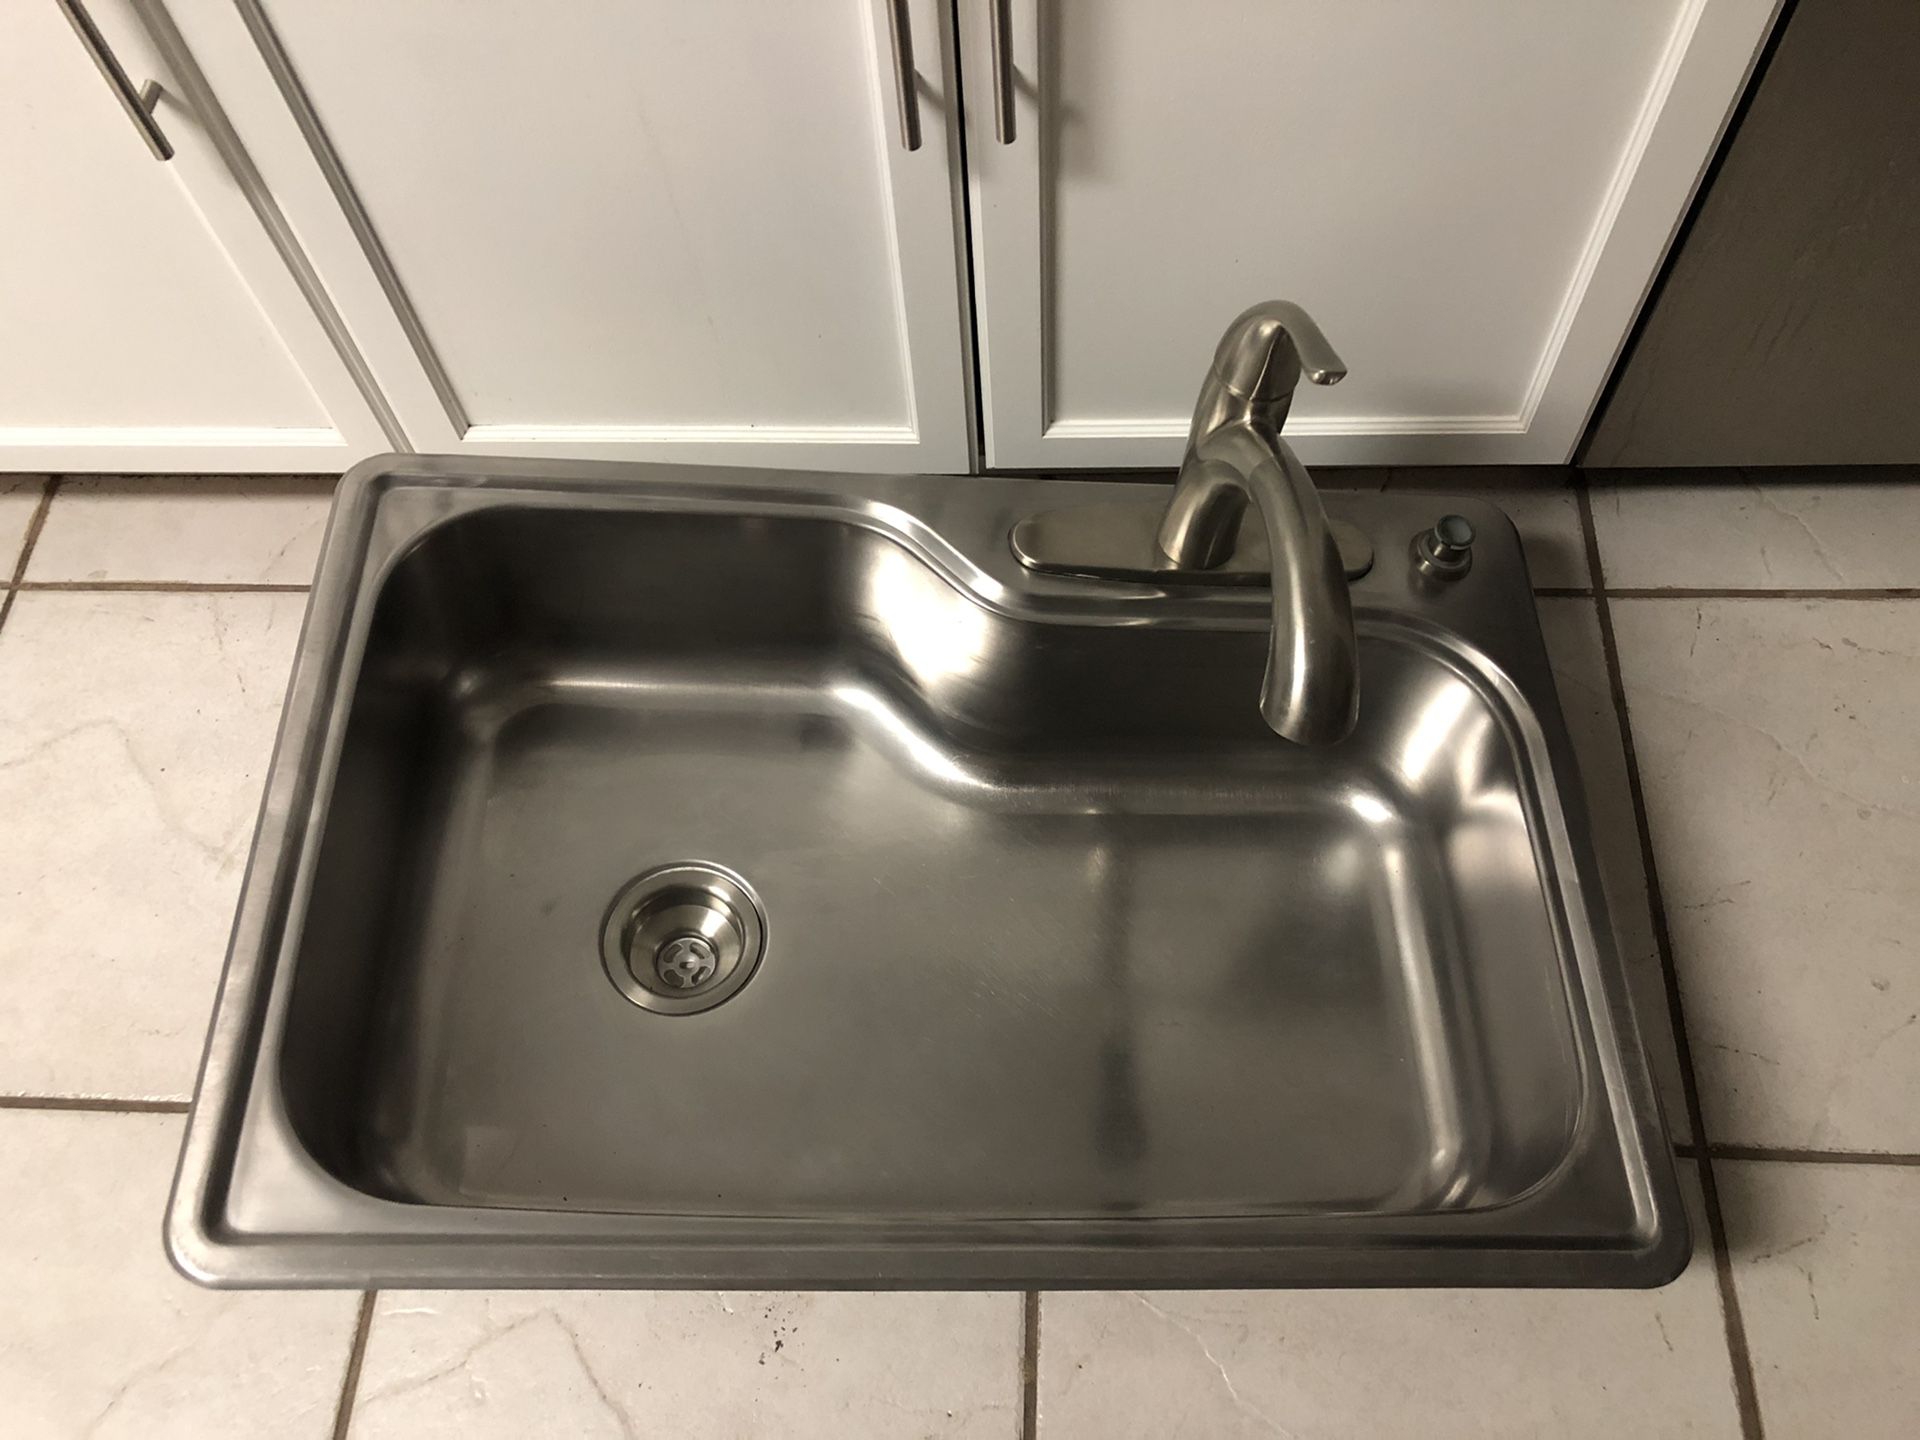 Kitchen sink, Faucet and drain